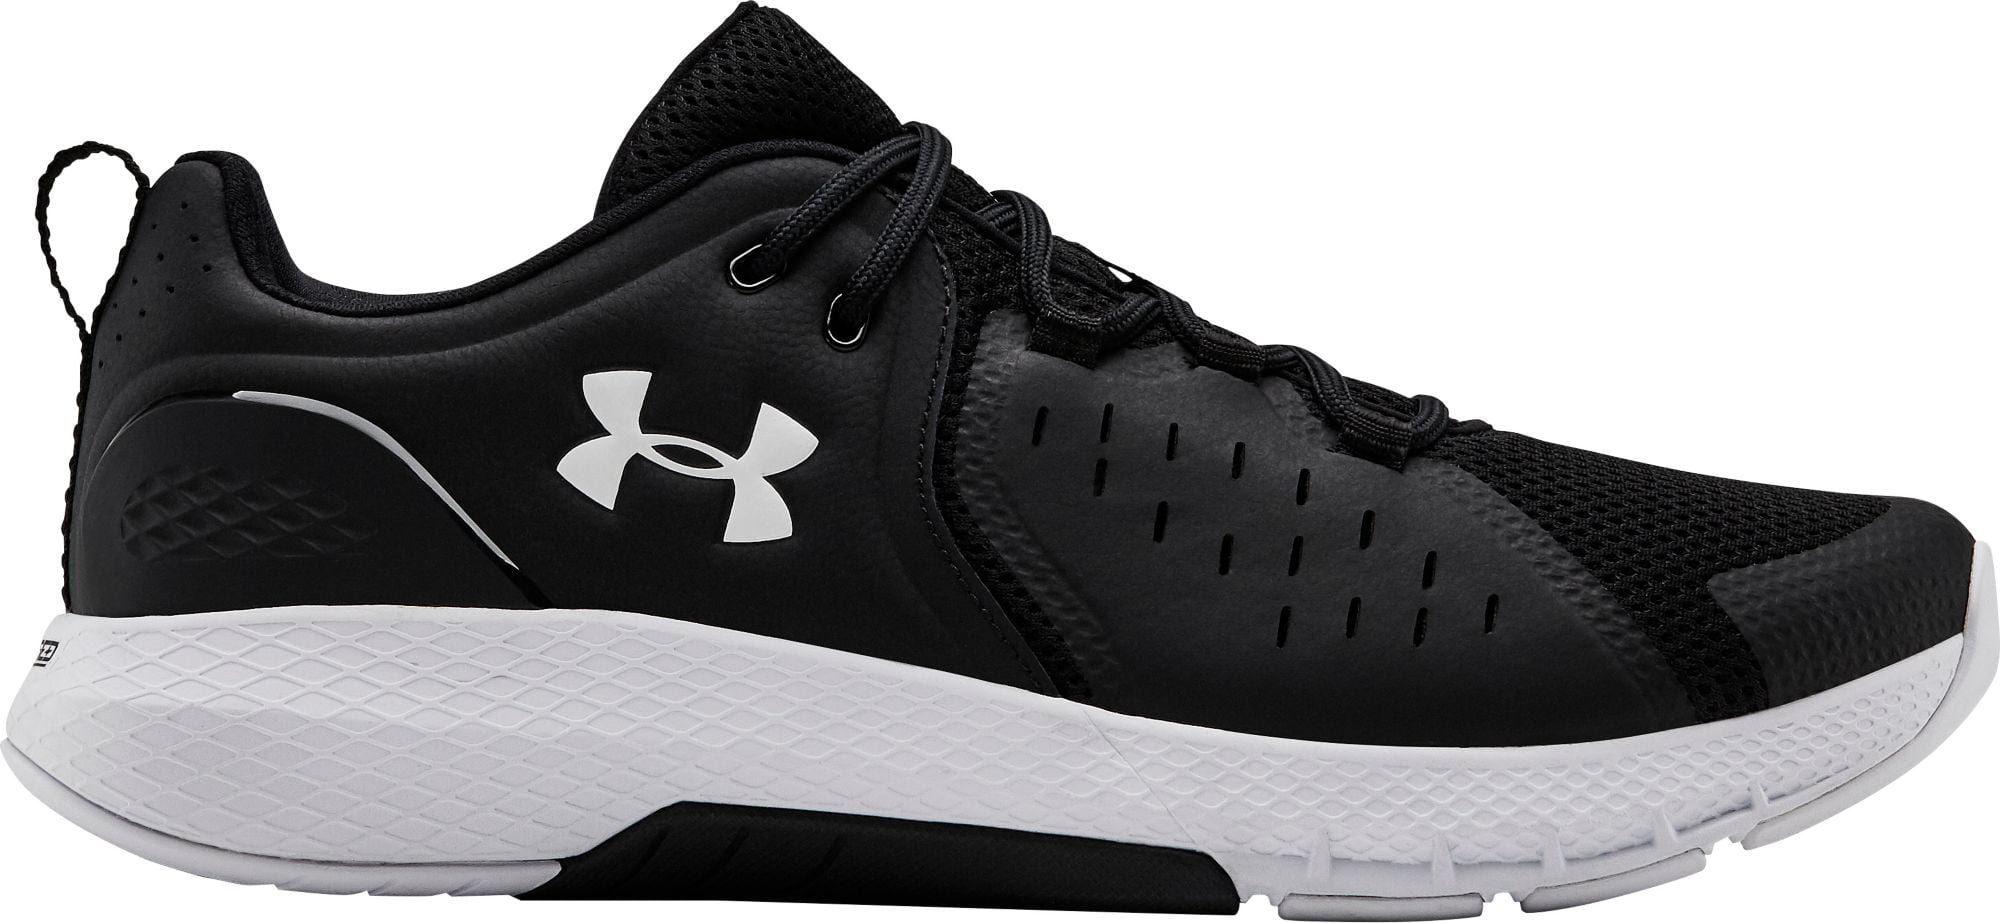 Under Armour Charged Commit pour homme en cuir TR 2.0 Baskets Chaussures 31% Off RRP 